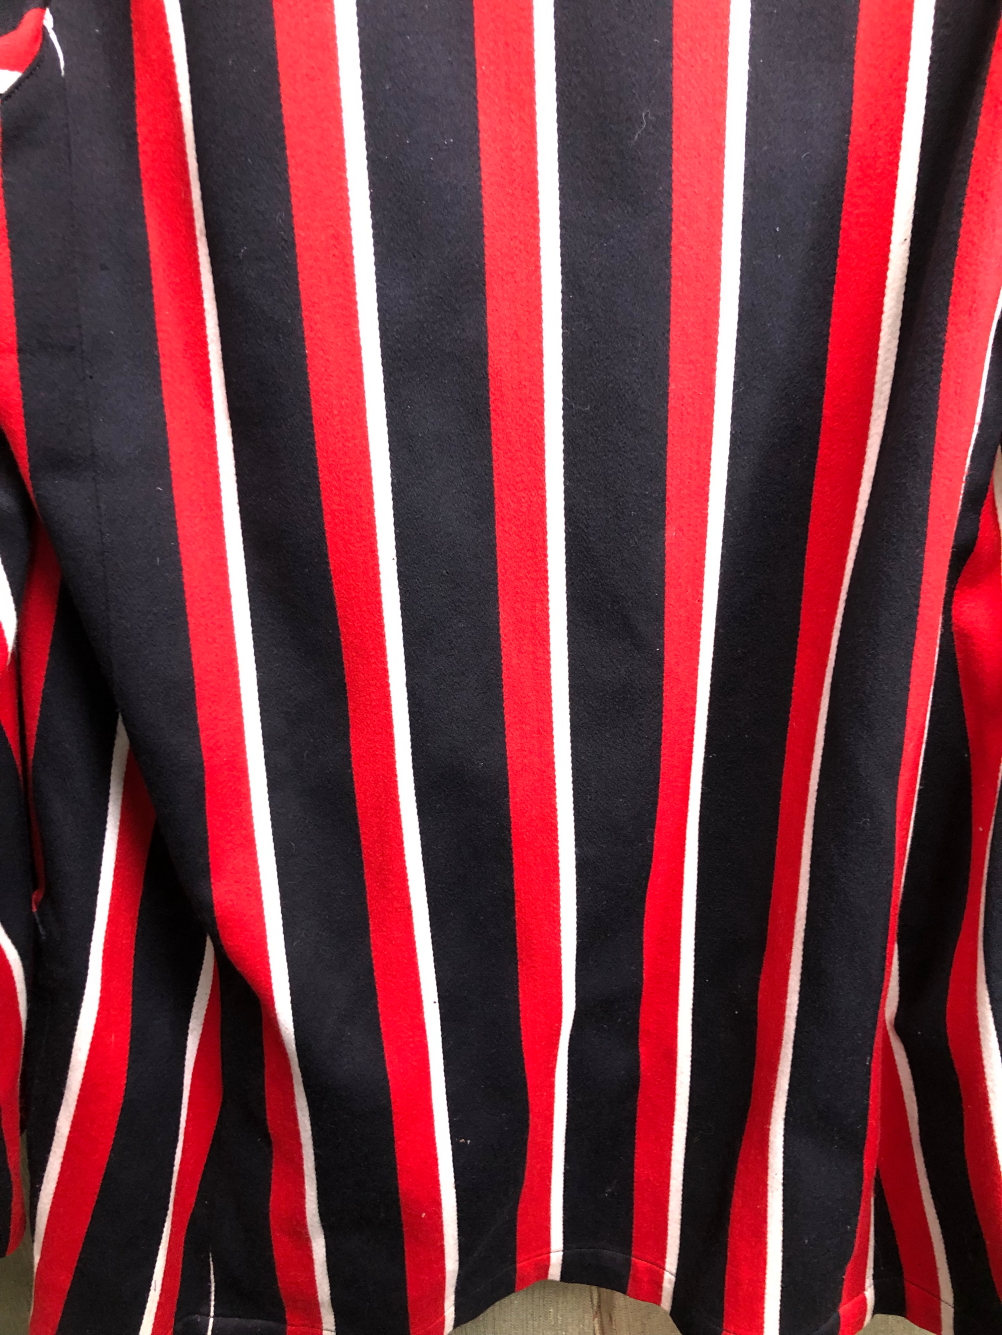 BLAZER. A MANS RED, BLACK AND WHITE BOATING BLAZER WITH ARMORIAL ON THE POCKET. PIT TO PIT 46cms, - Image 9 of 10